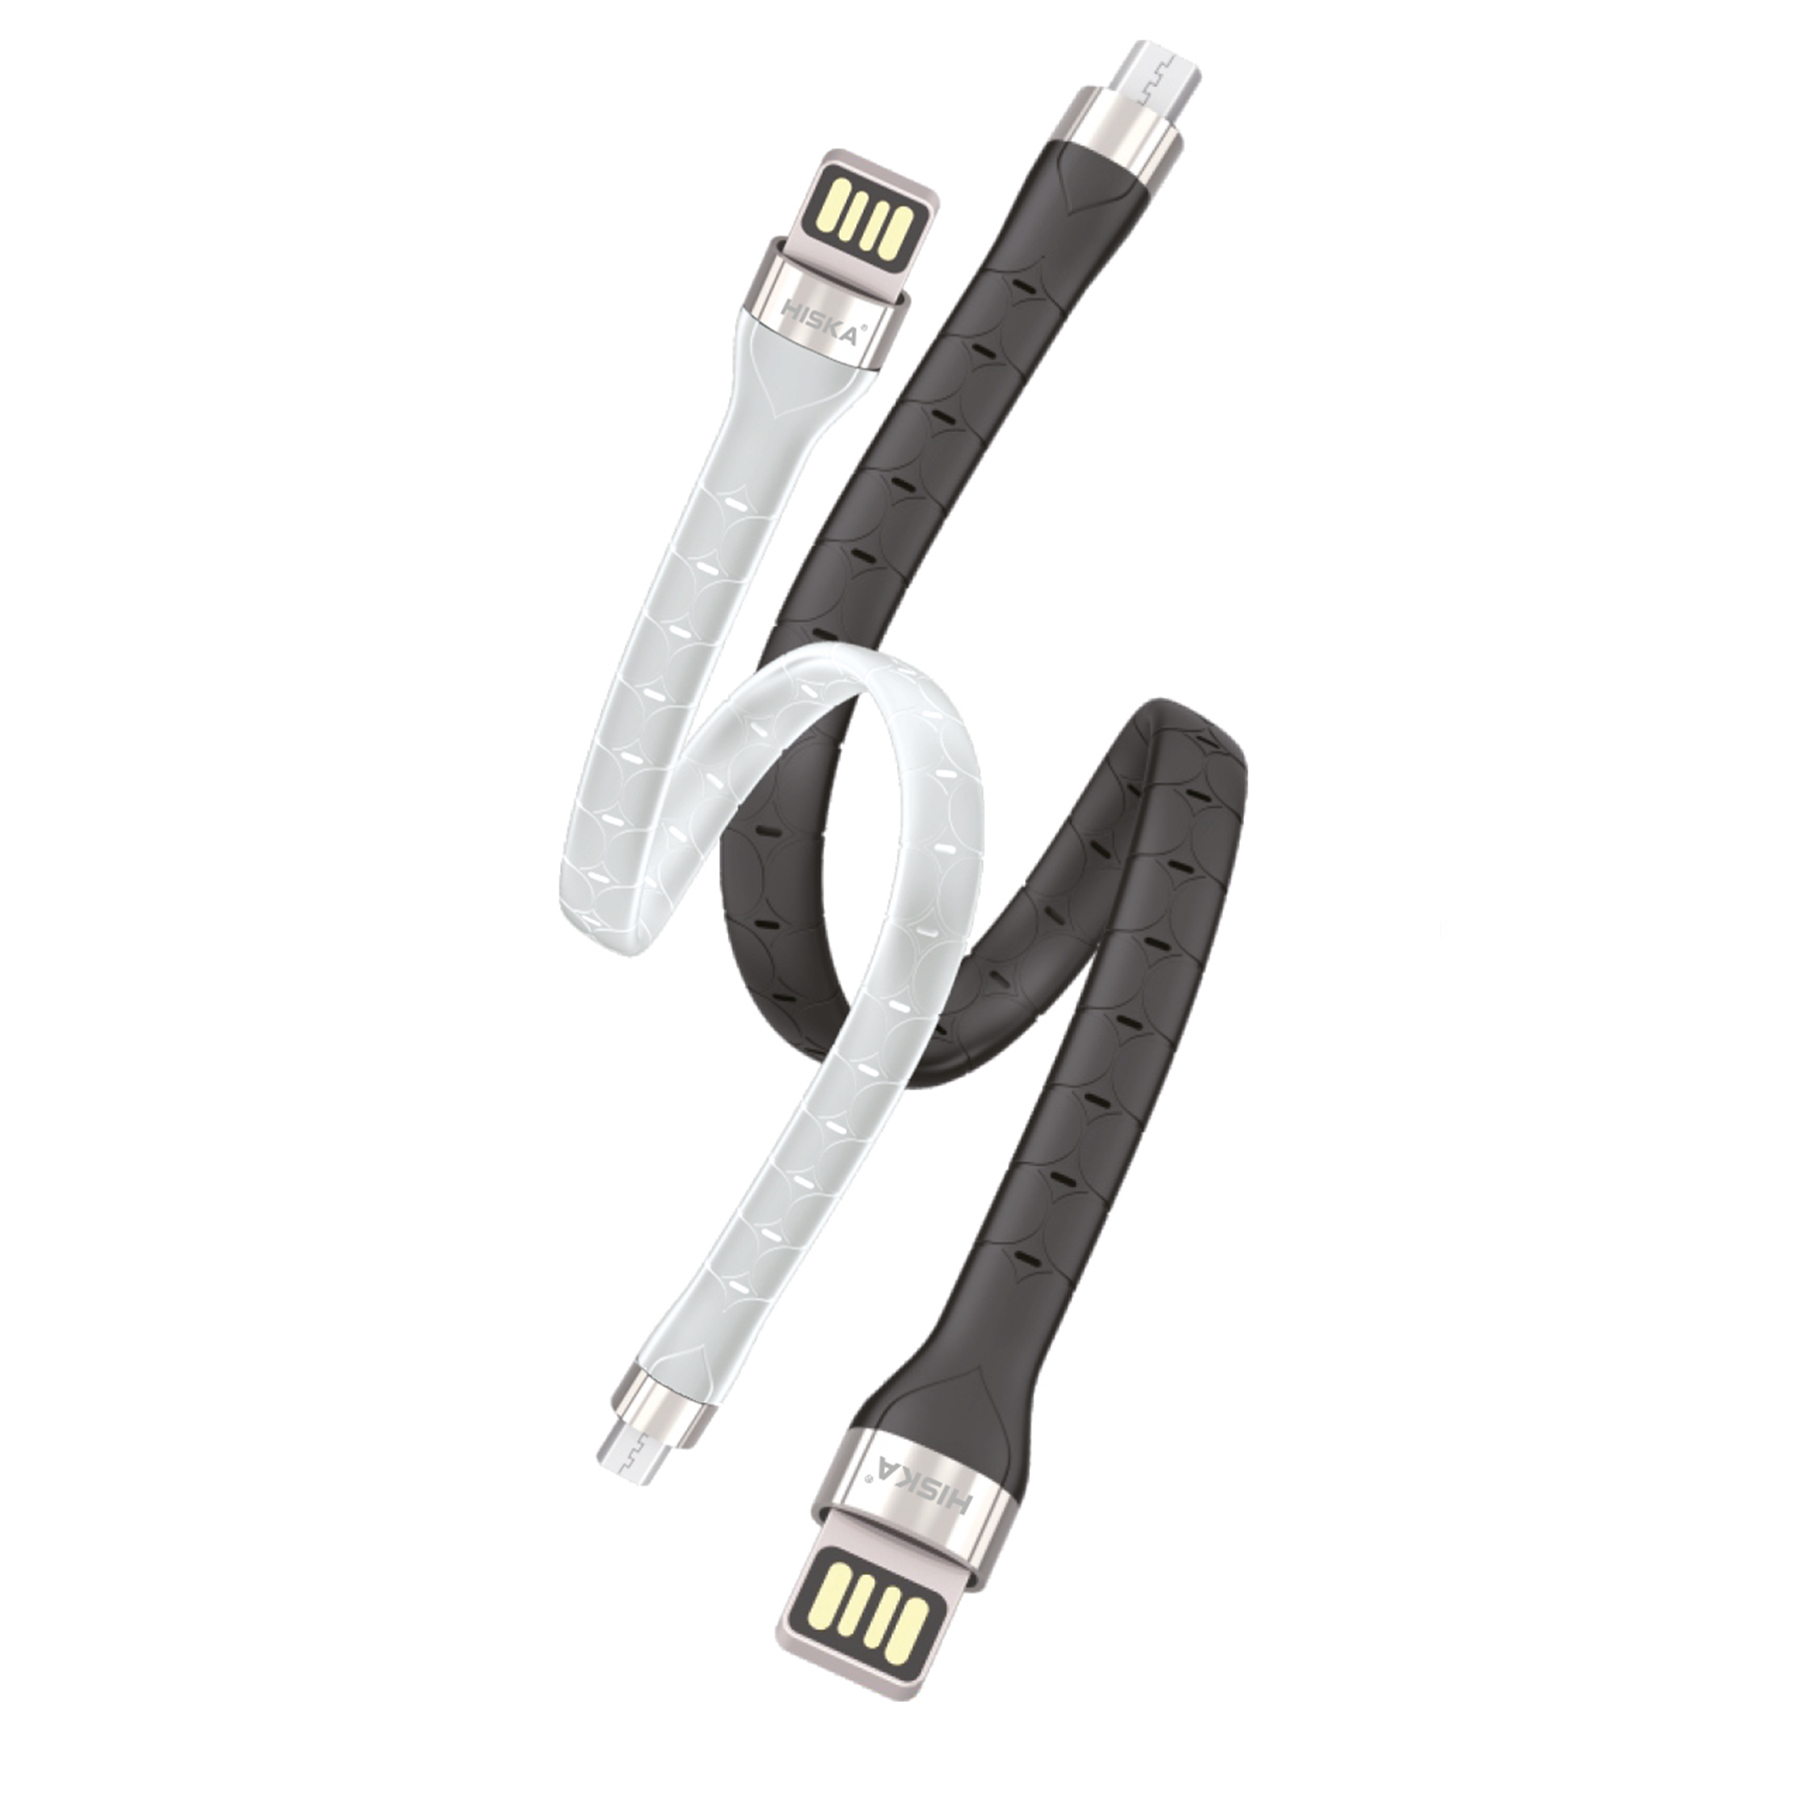 B164 Charging cable LX1015